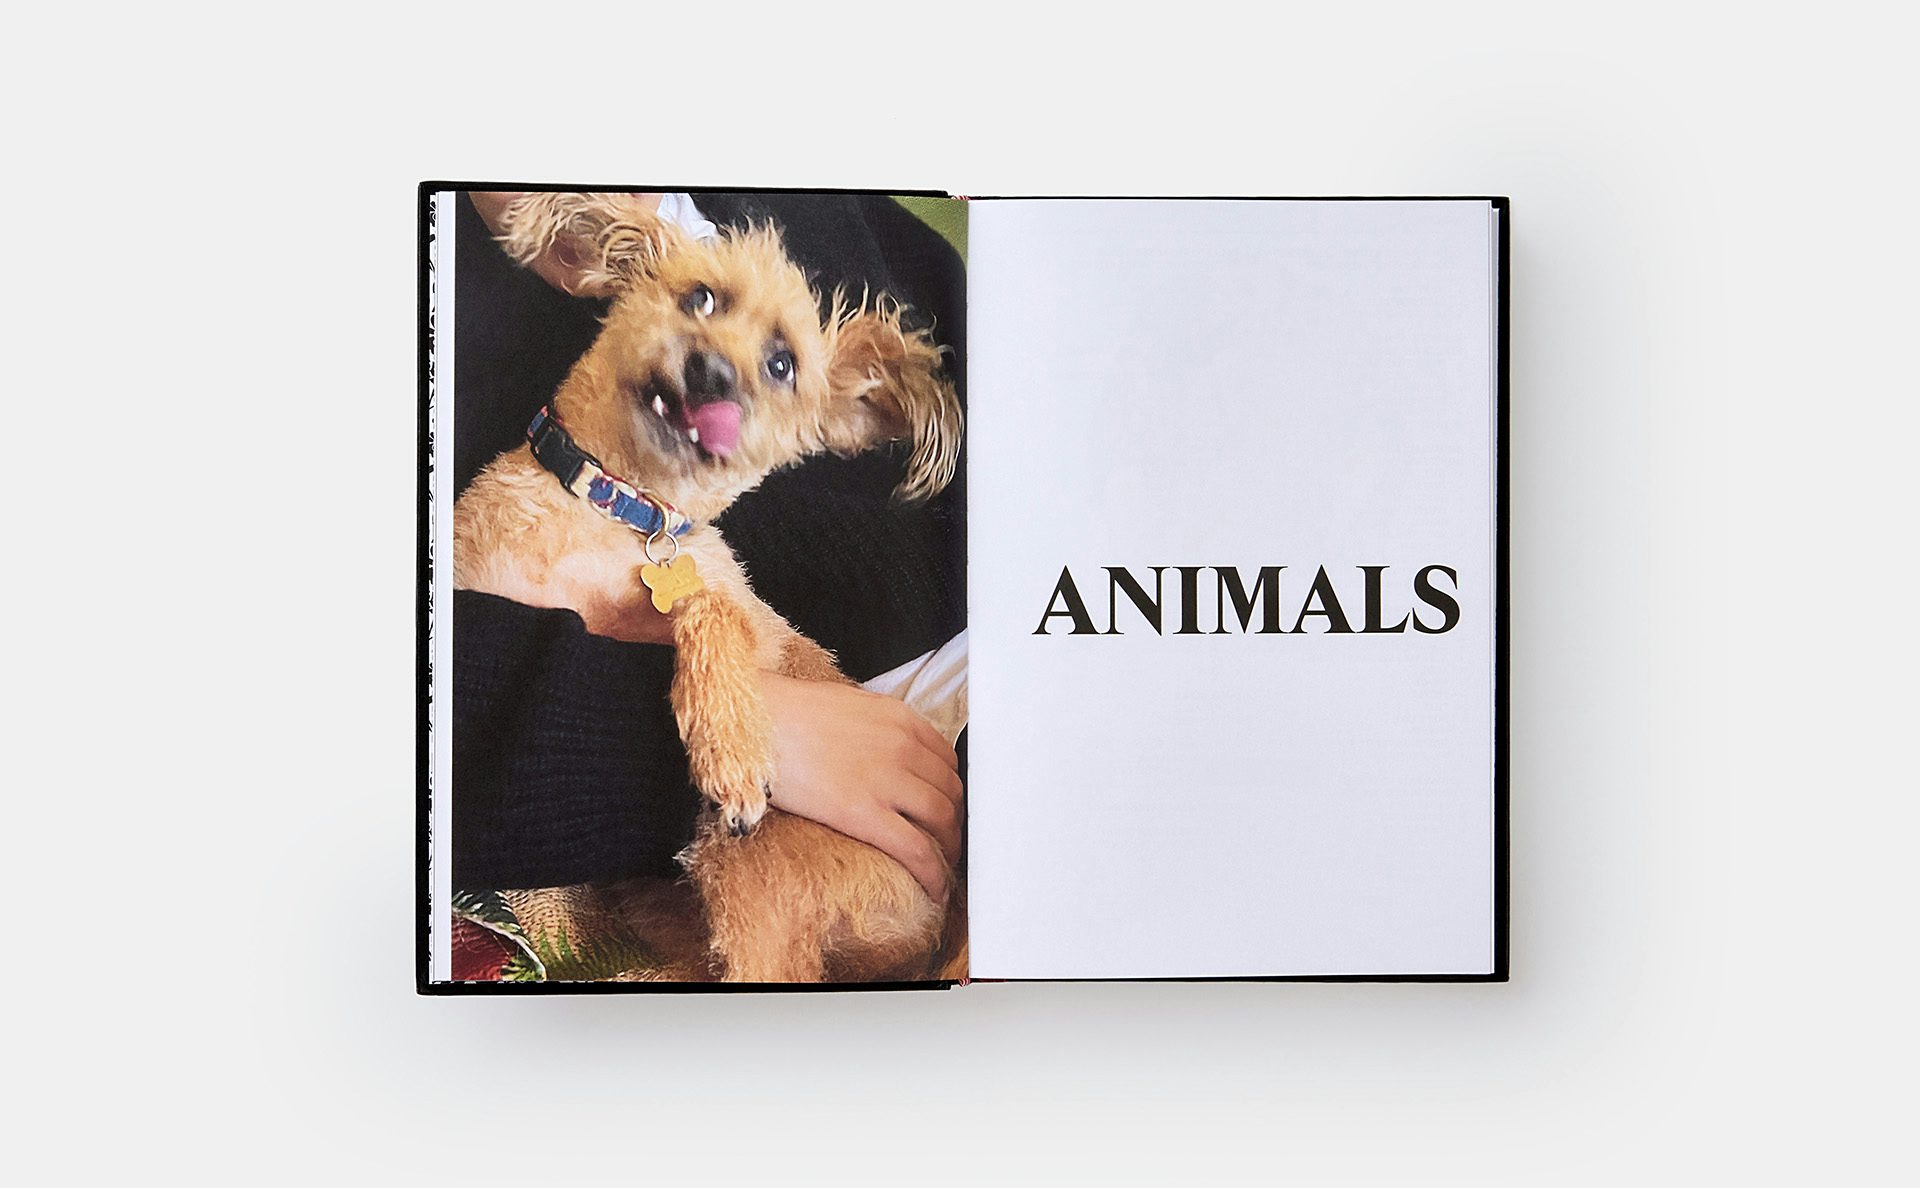 Image shows a spread from Palace Product Descriptions by Lev Tanju, featuring a picture of a dog on the left page and the chapter title 'Animals' on the right page